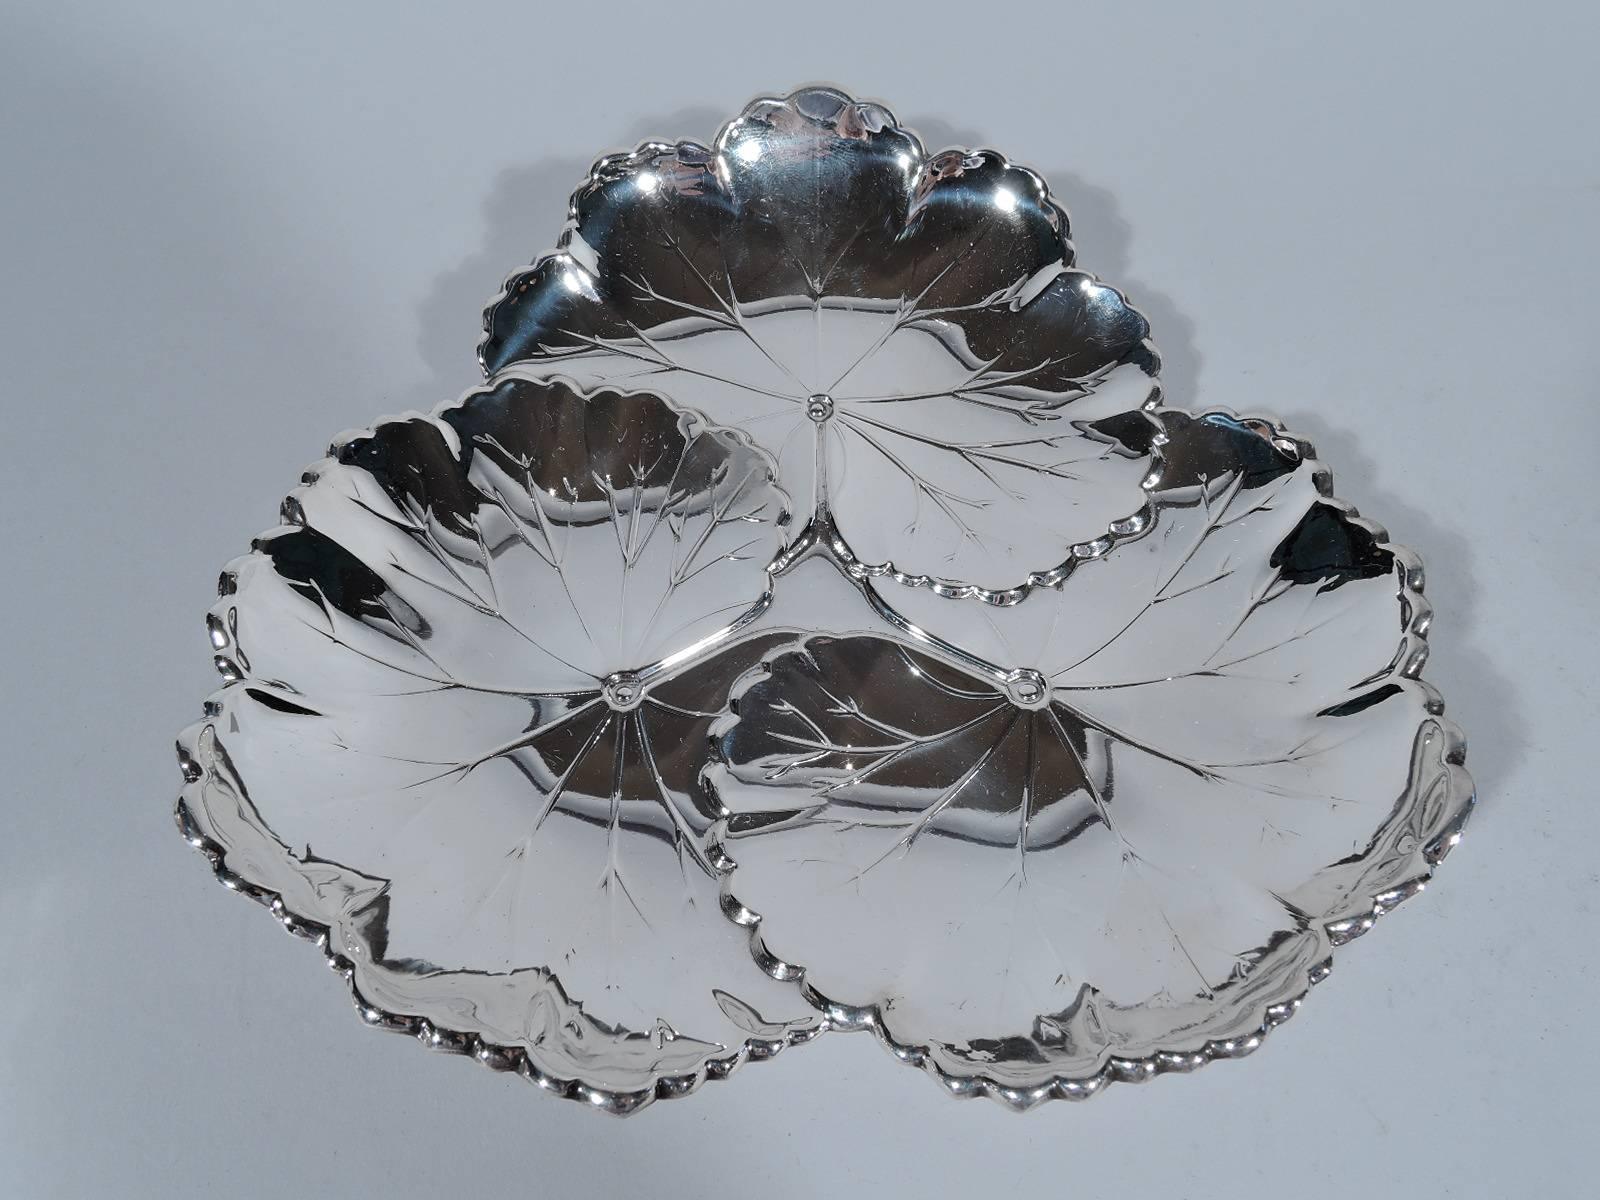 Sterling silver bowl. Made by Reed & Barton in Taunton, Mass. in 1948. Three overlapping lily pads with veins and scalloped edges. A stylish dish that harks back to the Japonesque vogue early in the century. Hallmark includes pattern no. X101 and